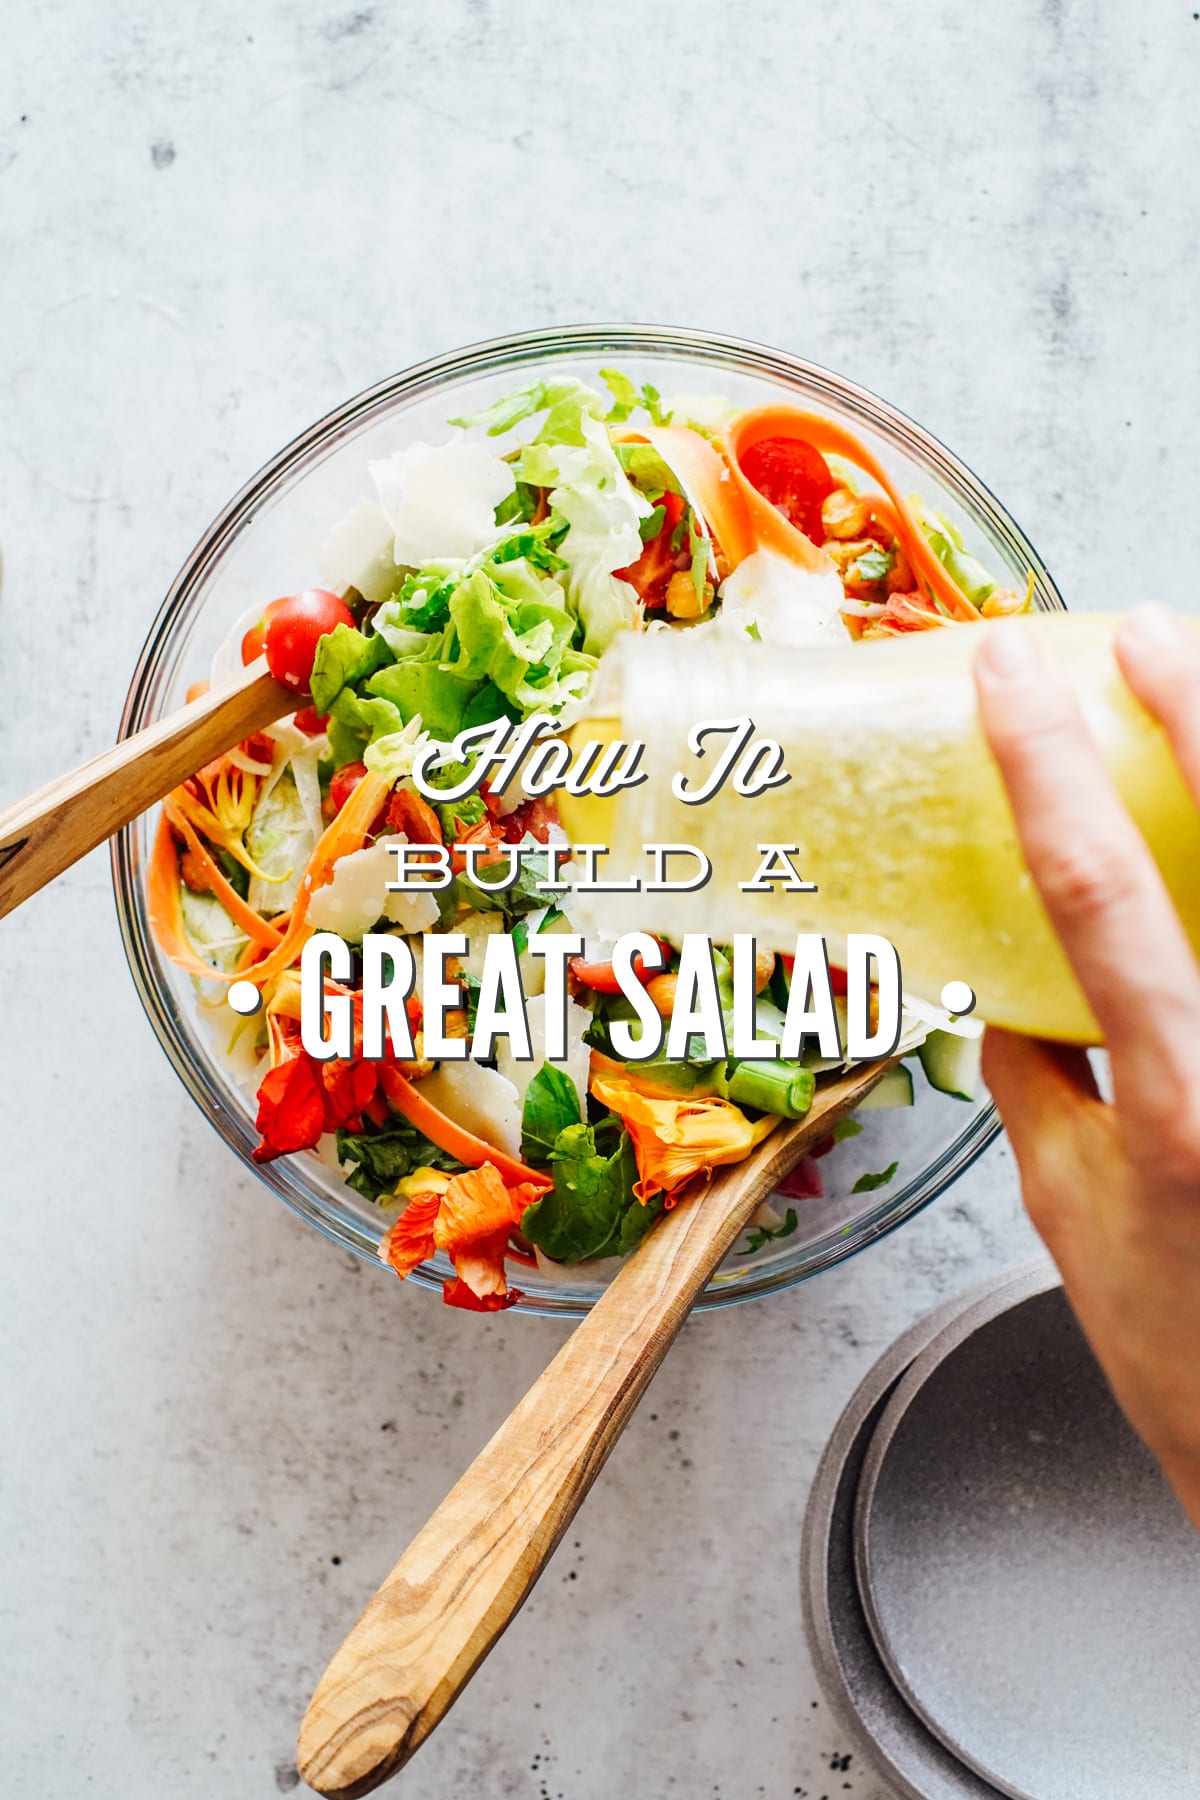 The Ultimate Green Salad Guide: How to Make A Salad That Doesn’t Taste Like Crap